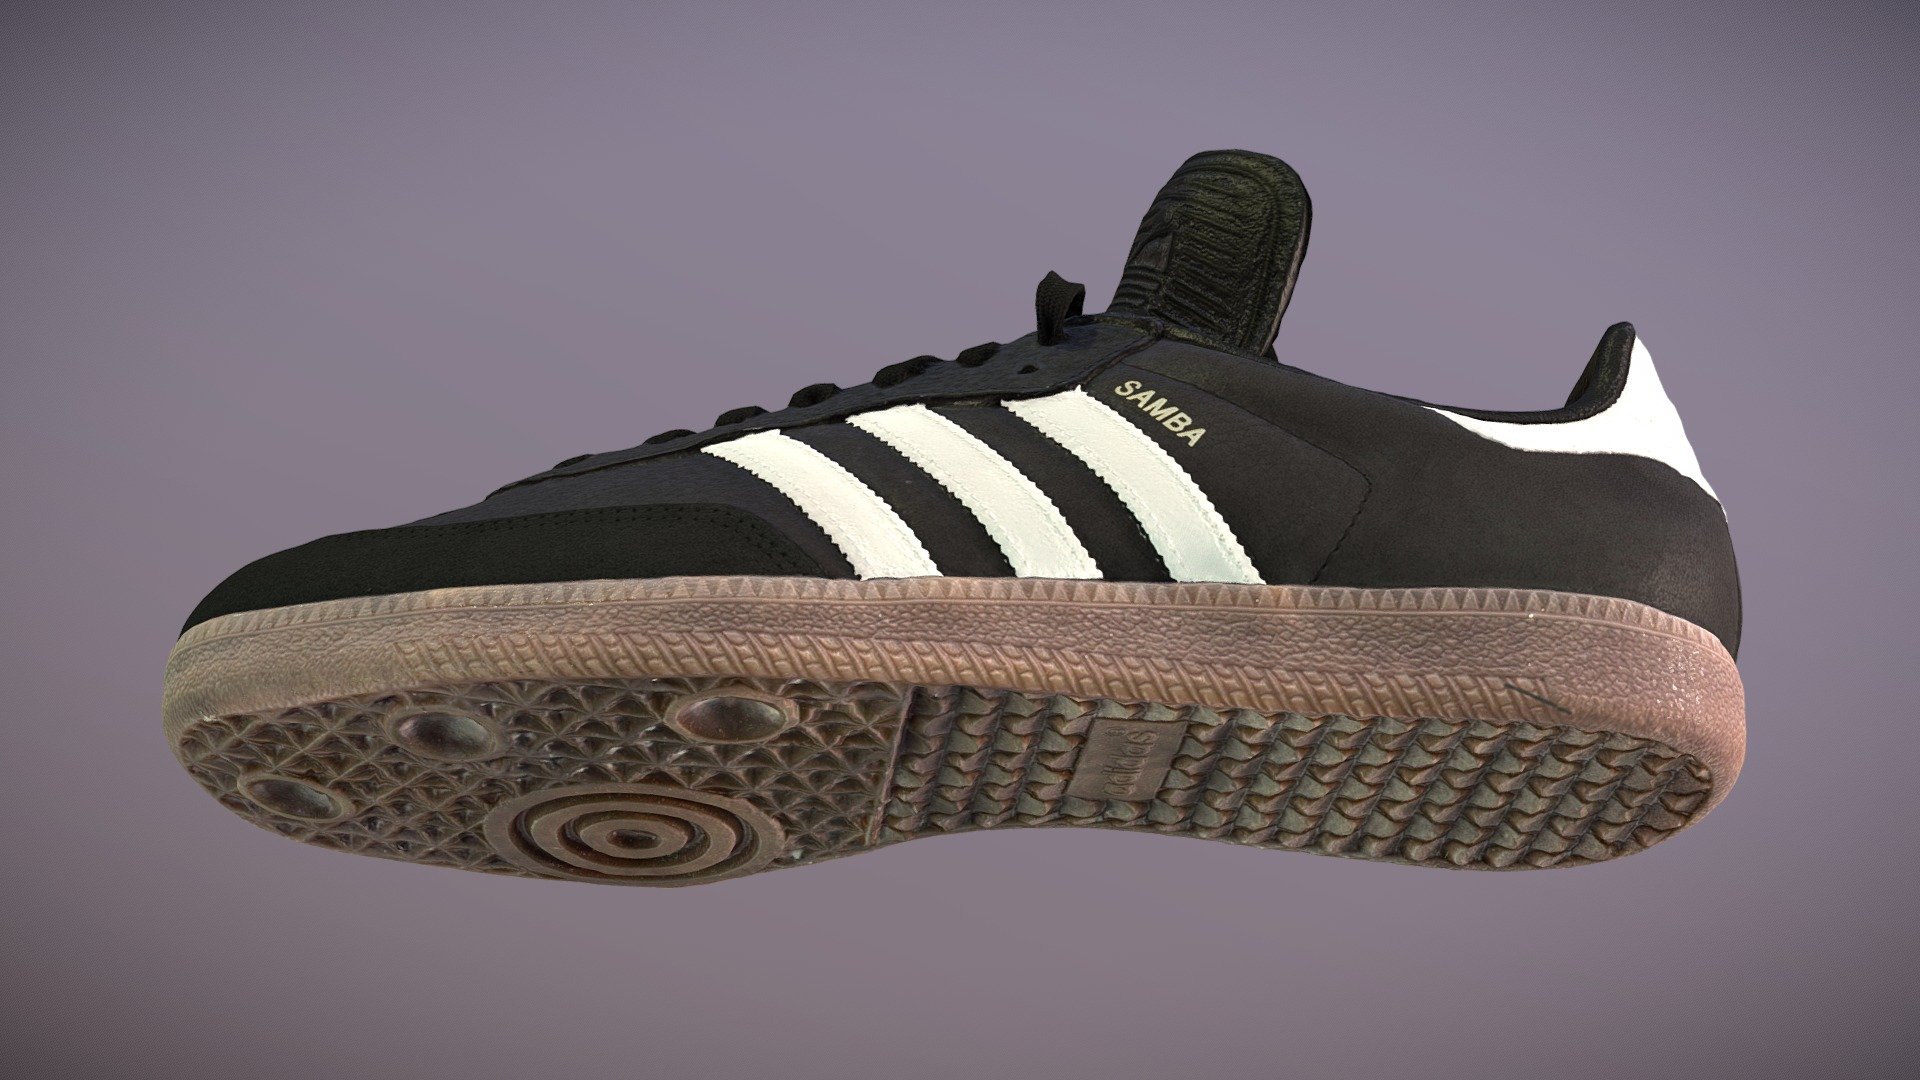 Adidas Samba soccer/football shoe, 3D scanned with a turntable, lots of polarized lights, and a single A7R (613 photos)

Cleanup and retopology to quads in ZBrush. PBR workflow in Photoshop to create specularity, roughness, and metal maps.

High polygon (~3.2M poly) version of model and textures is included.

Full textures are 8K x 8K and low poly textures are at 2K x 2K 3d model